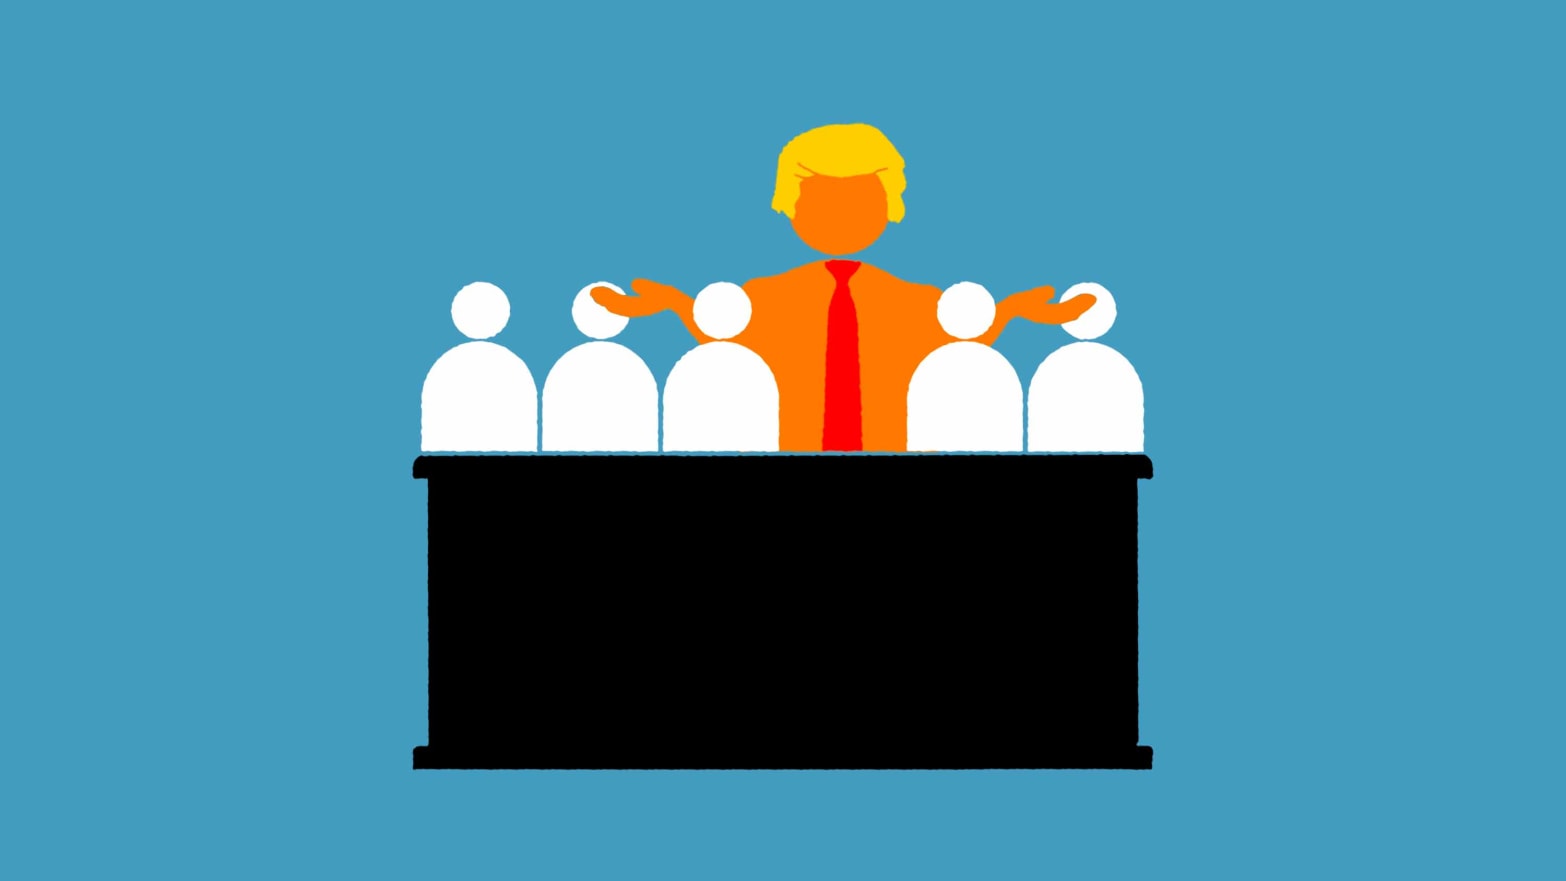 Illustration of a jury in a jury box with one member orange with a red tie and Donald Trump hair